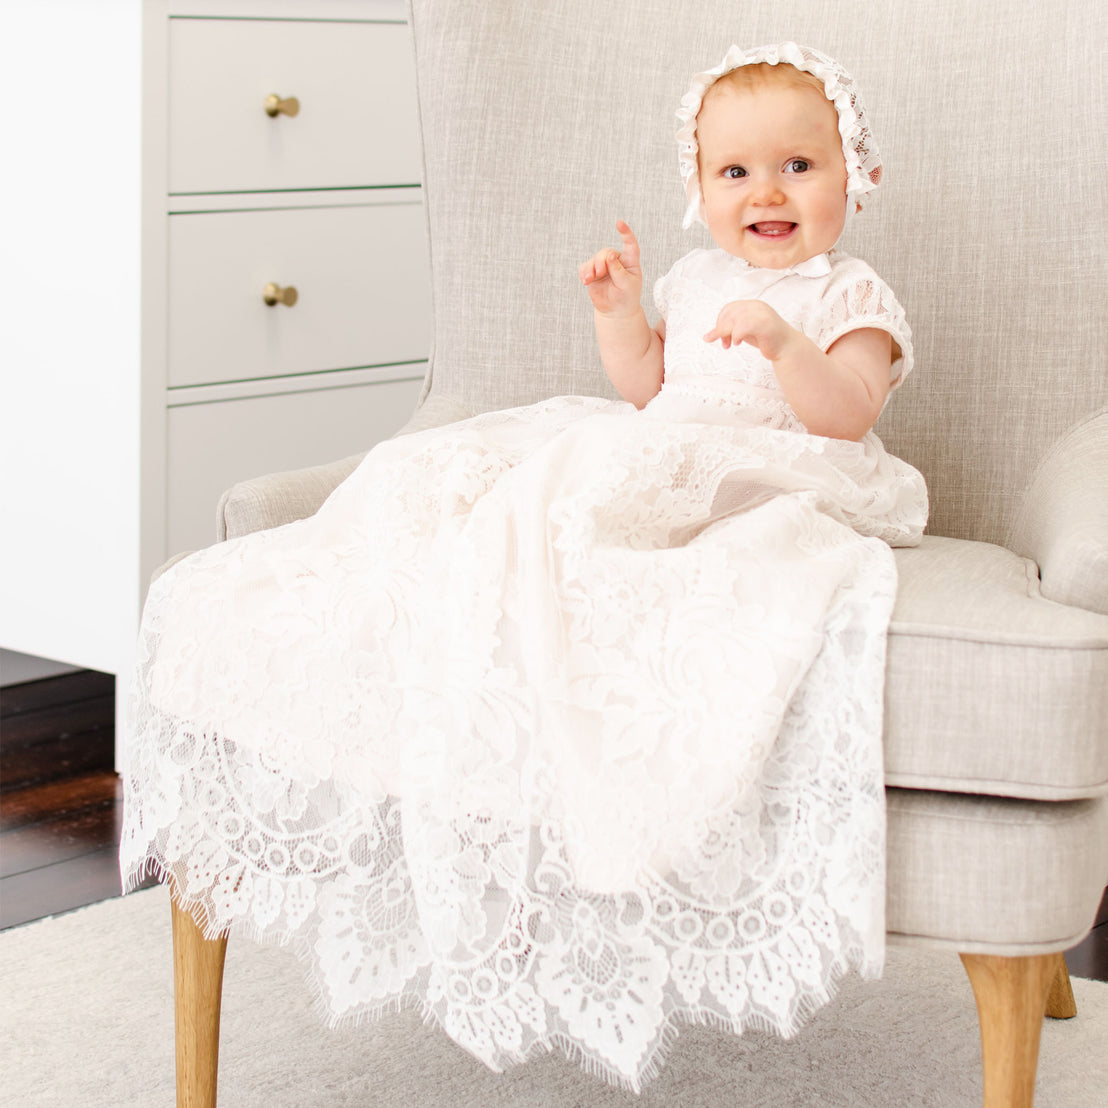 Baby girl sitting on a chair and wearing the pink Victoria Puff Sleeve Christening Gown & Bonnet. The gown is made from a pink silk Dupioni lining under an embroidered ivory floral lace overlay.